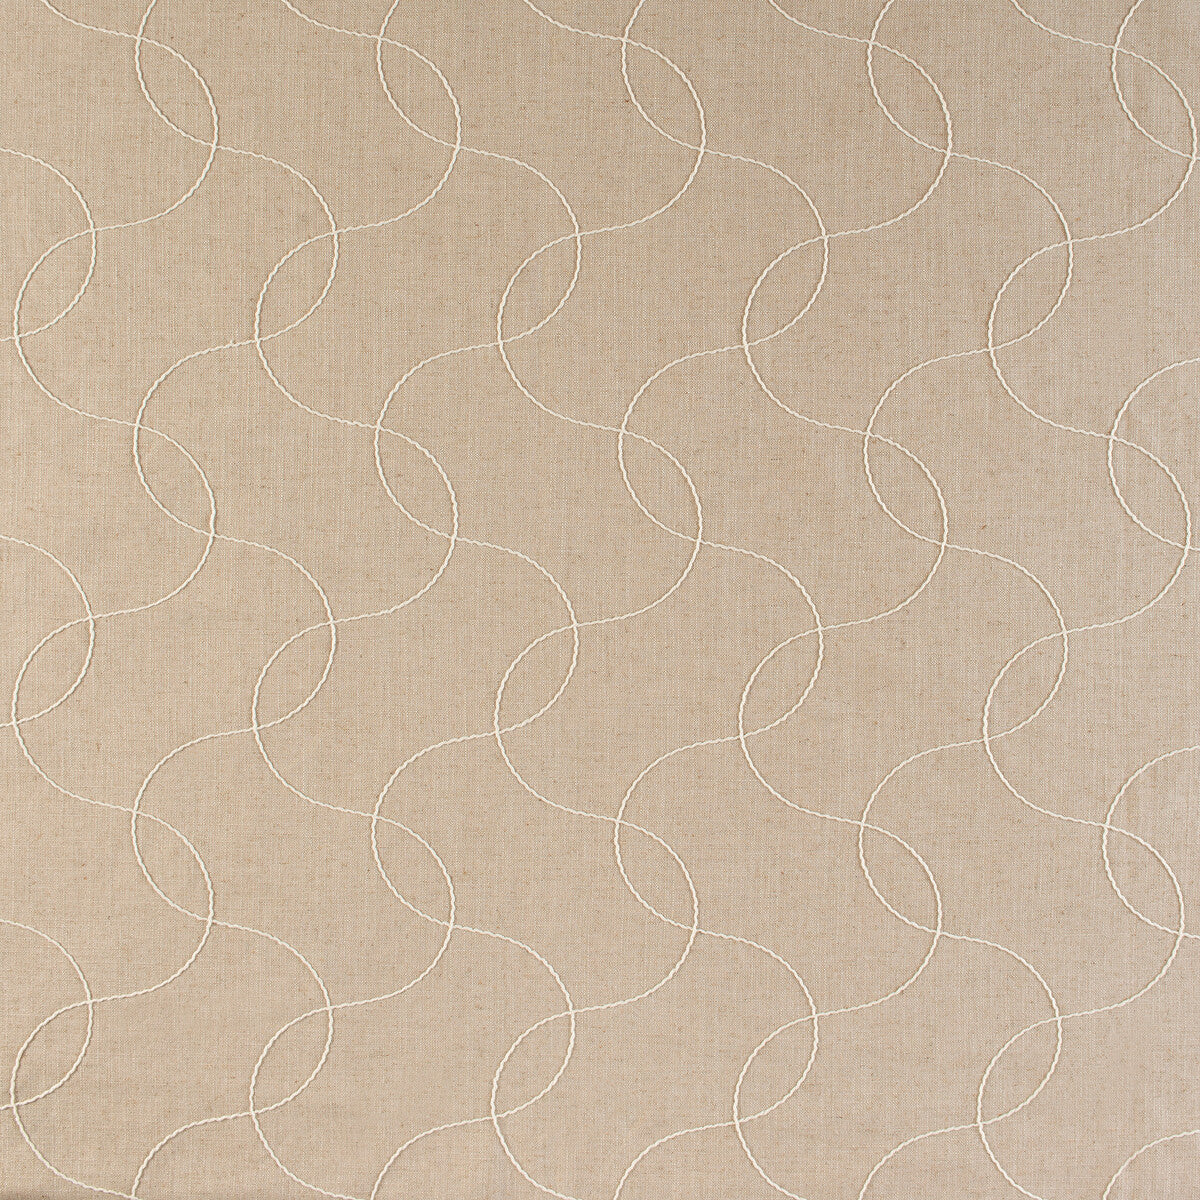 Awander fabric in linen color - pattern 35898.16.0 - by Kravet Design in the Barbara Barry Home Midsummer collection